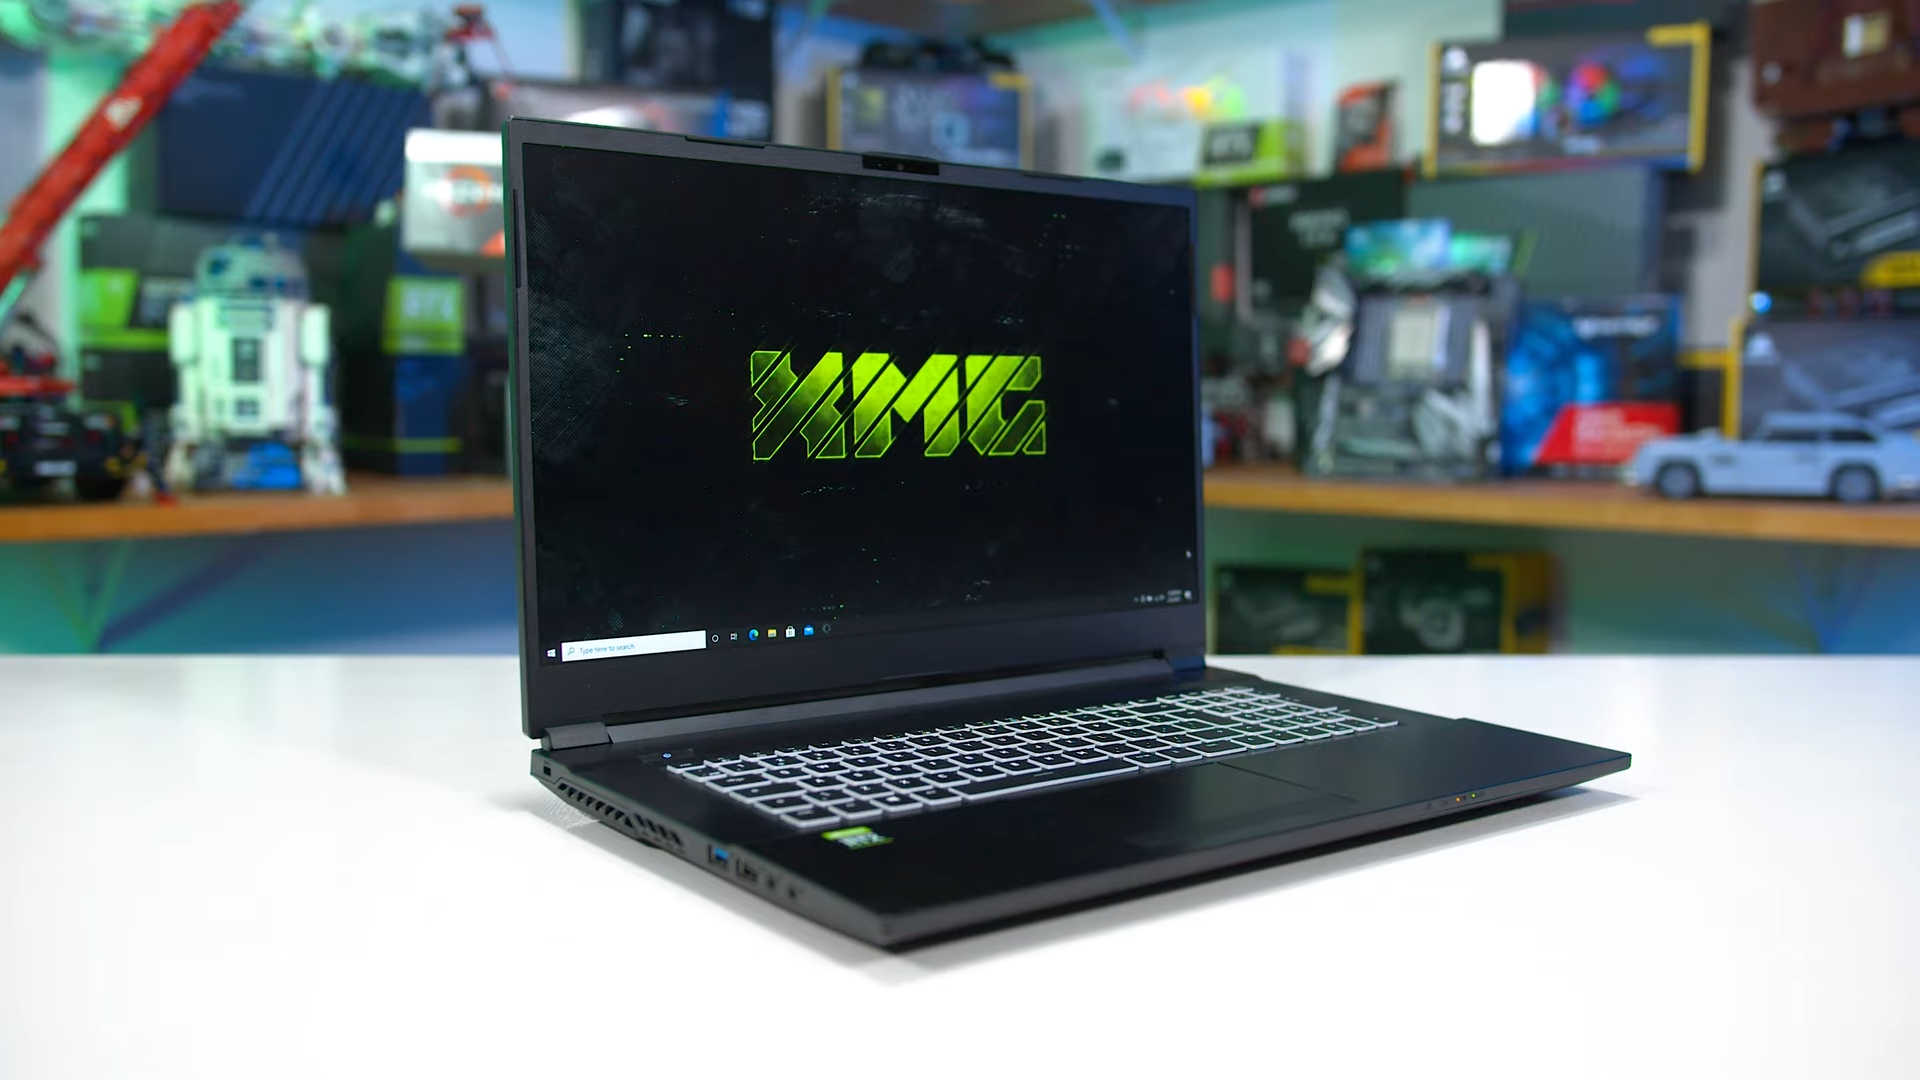 NVIDIA GeForce RTX 3060 laptops are now available 